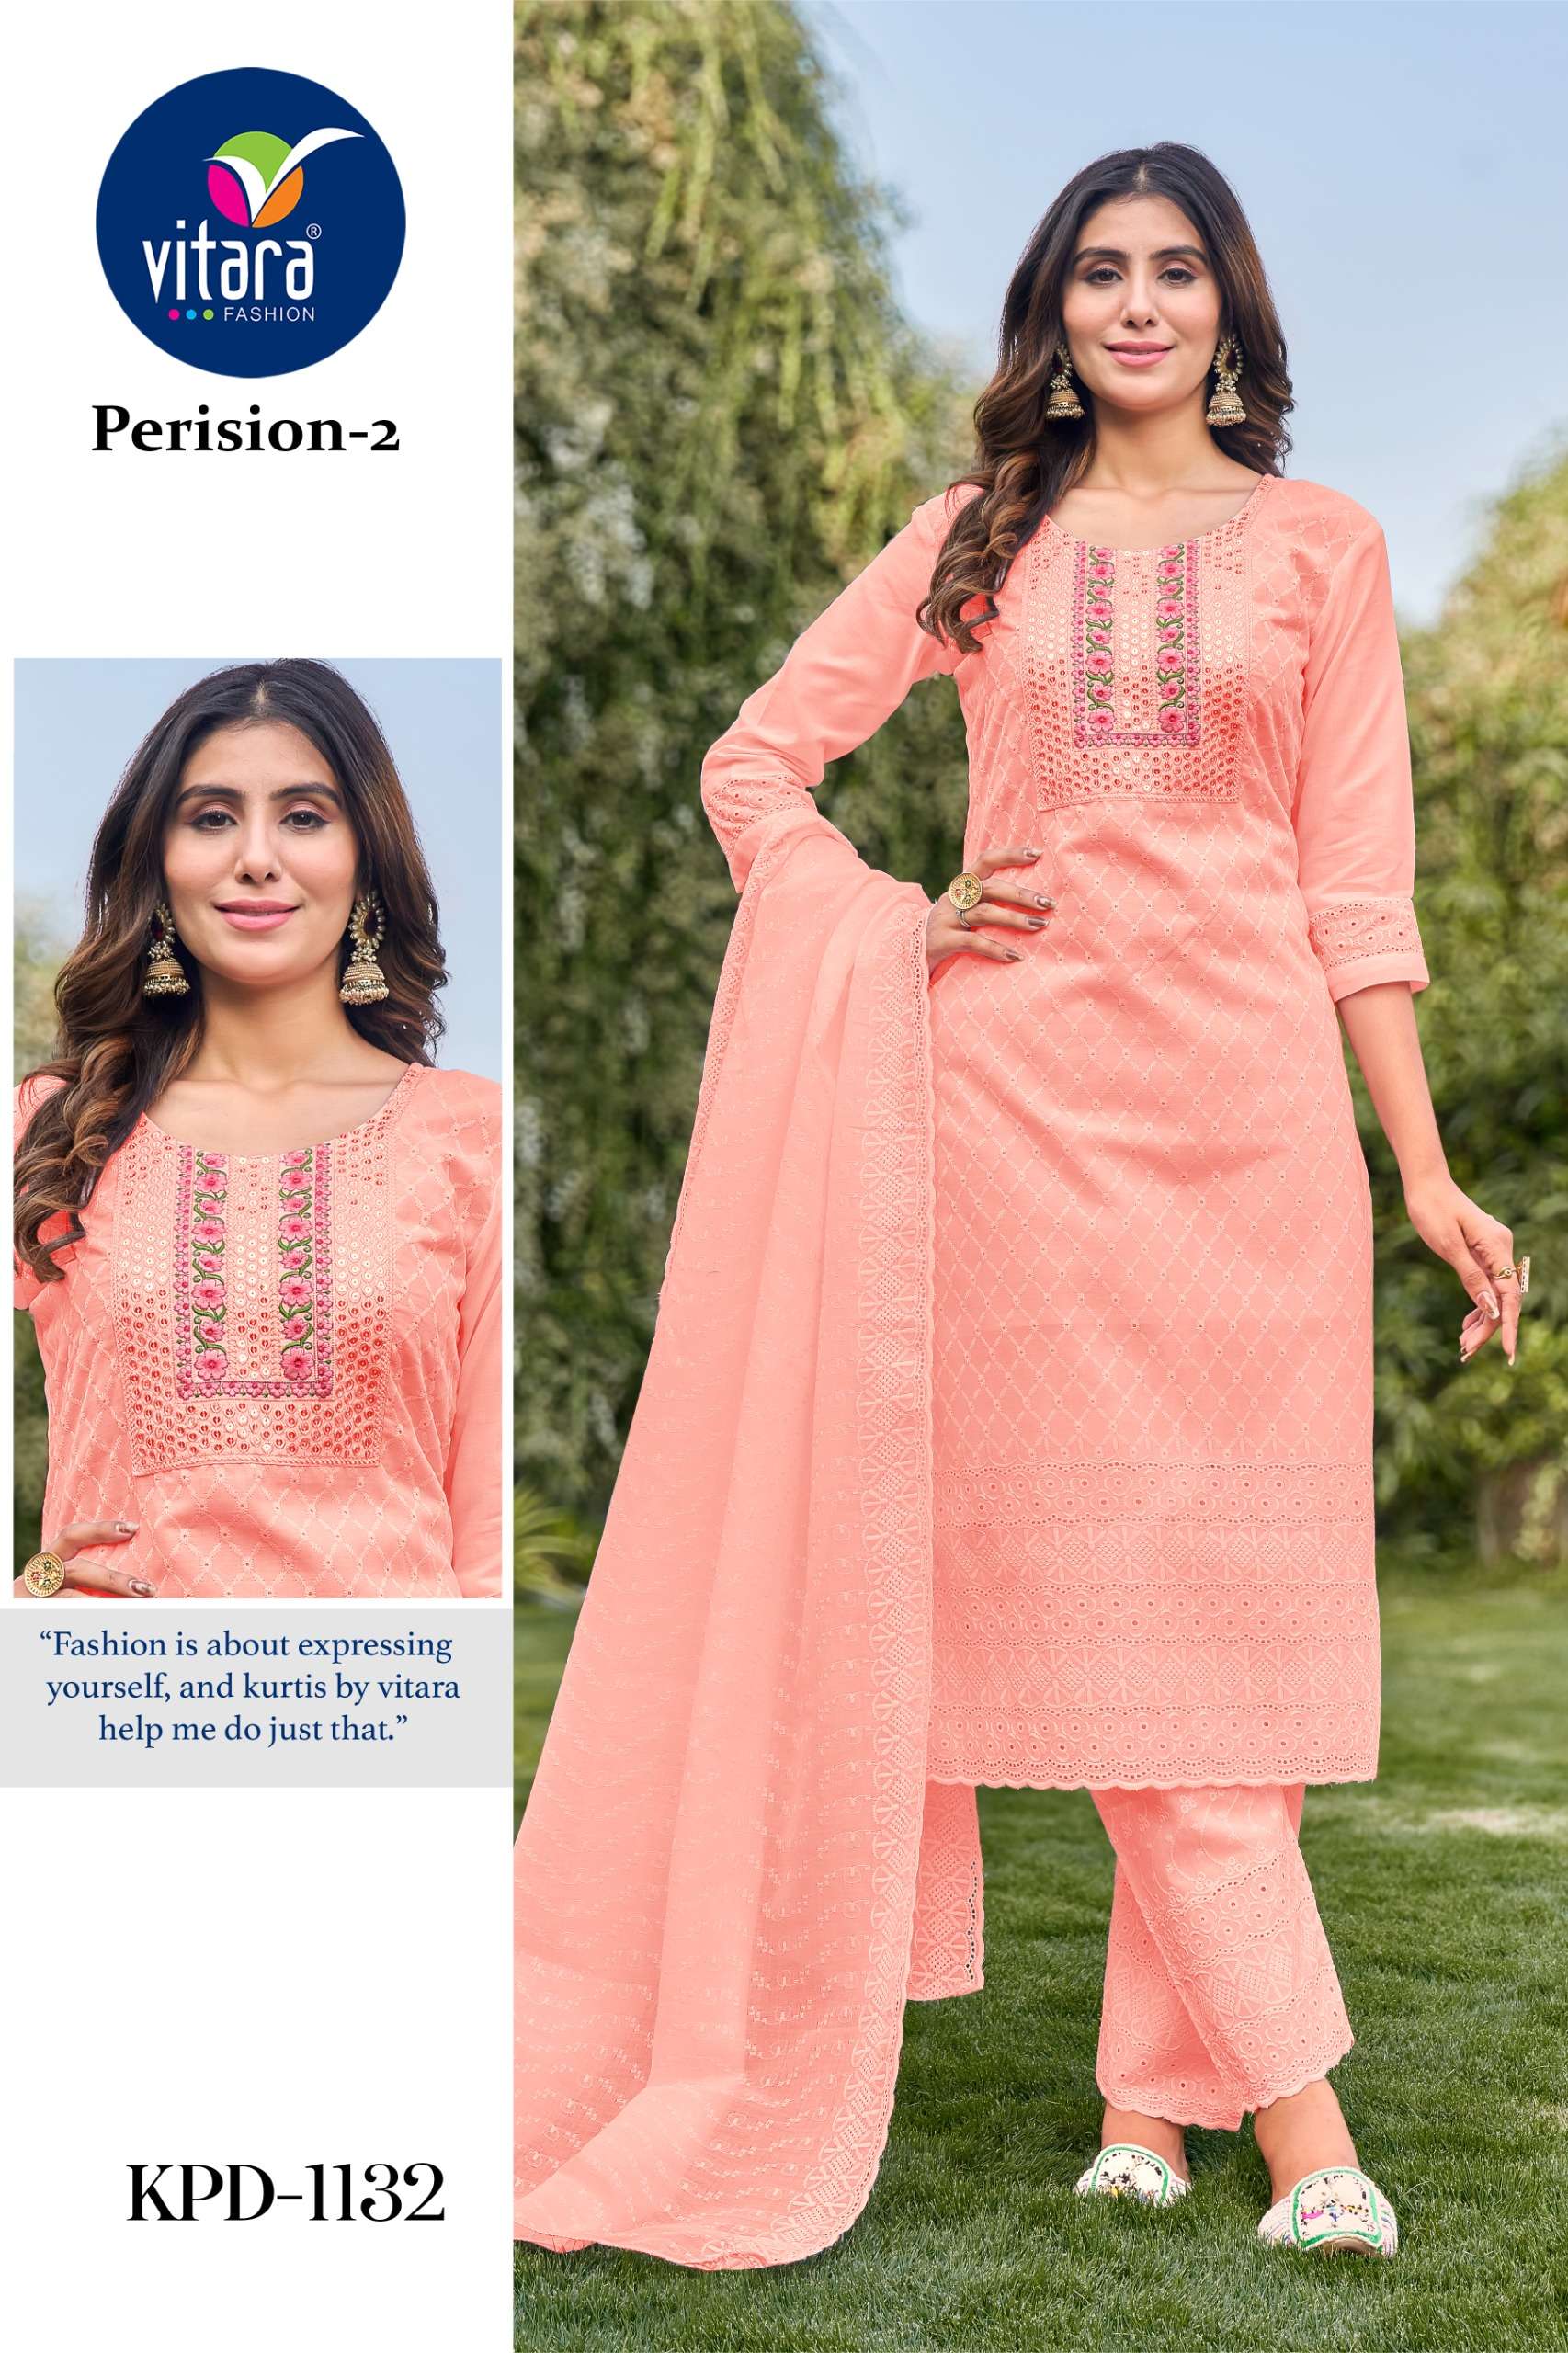 PERISION VOL 2 COTTON SHIFFLI BORRER EMBROIDERY WORK KURTI WITH PANT AND MAL COTTON DUPATTA BY WANNA...